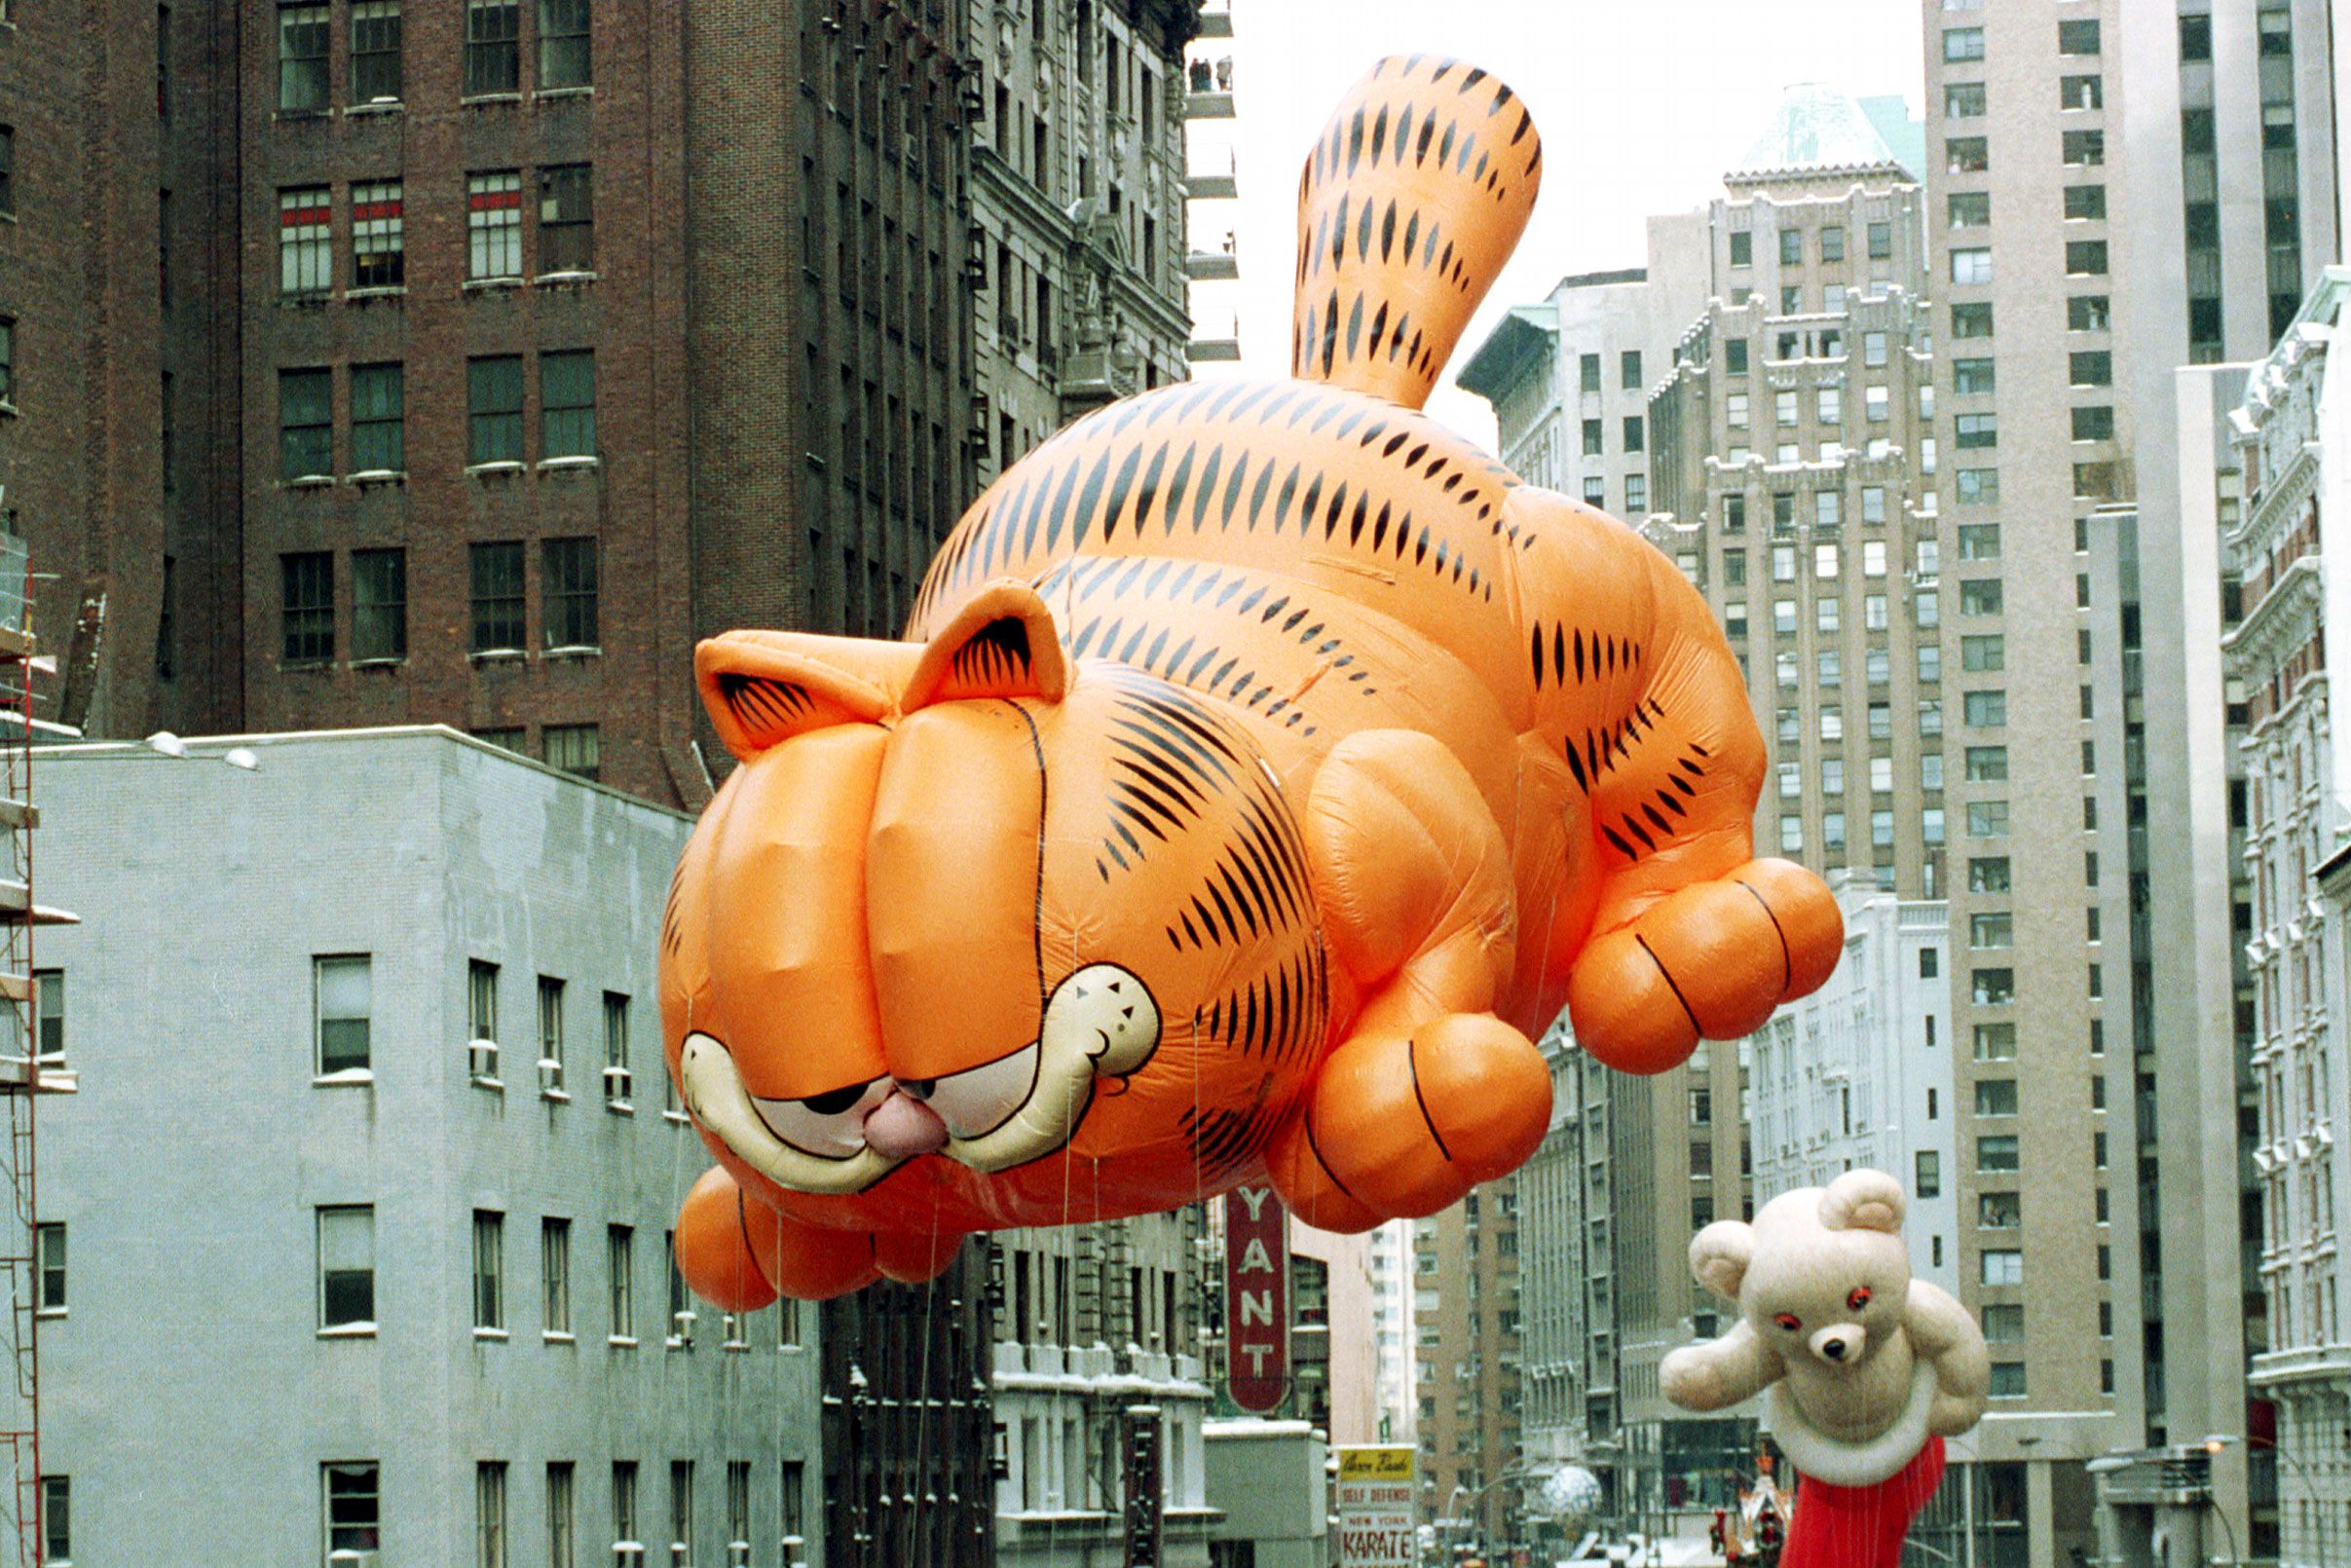 Garfield bought by Viacom for Nickelodeon